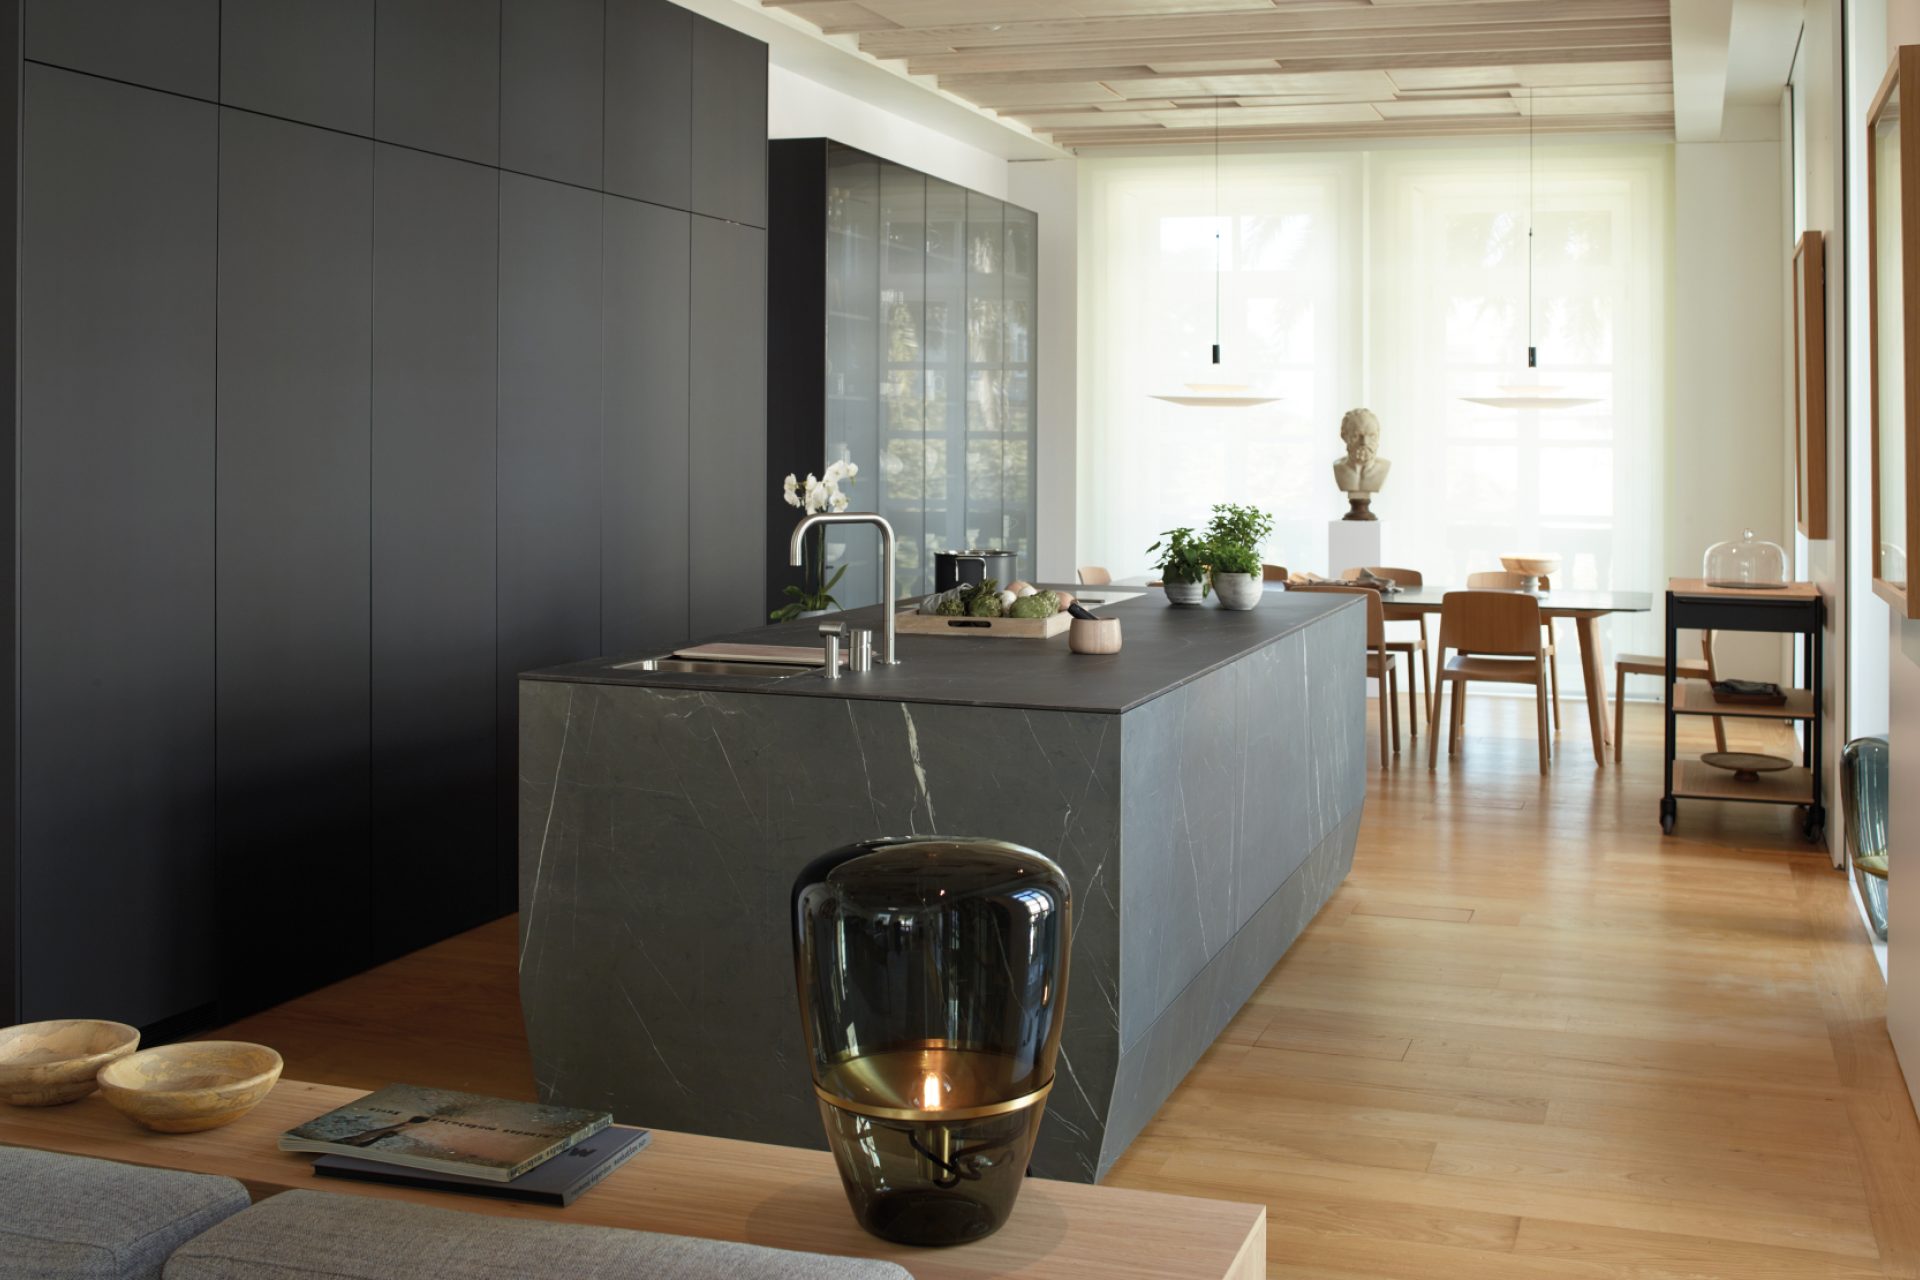 Dark grey linear kitchen design with a central island, sideboard and display cabinet, open to the dining room and the living room